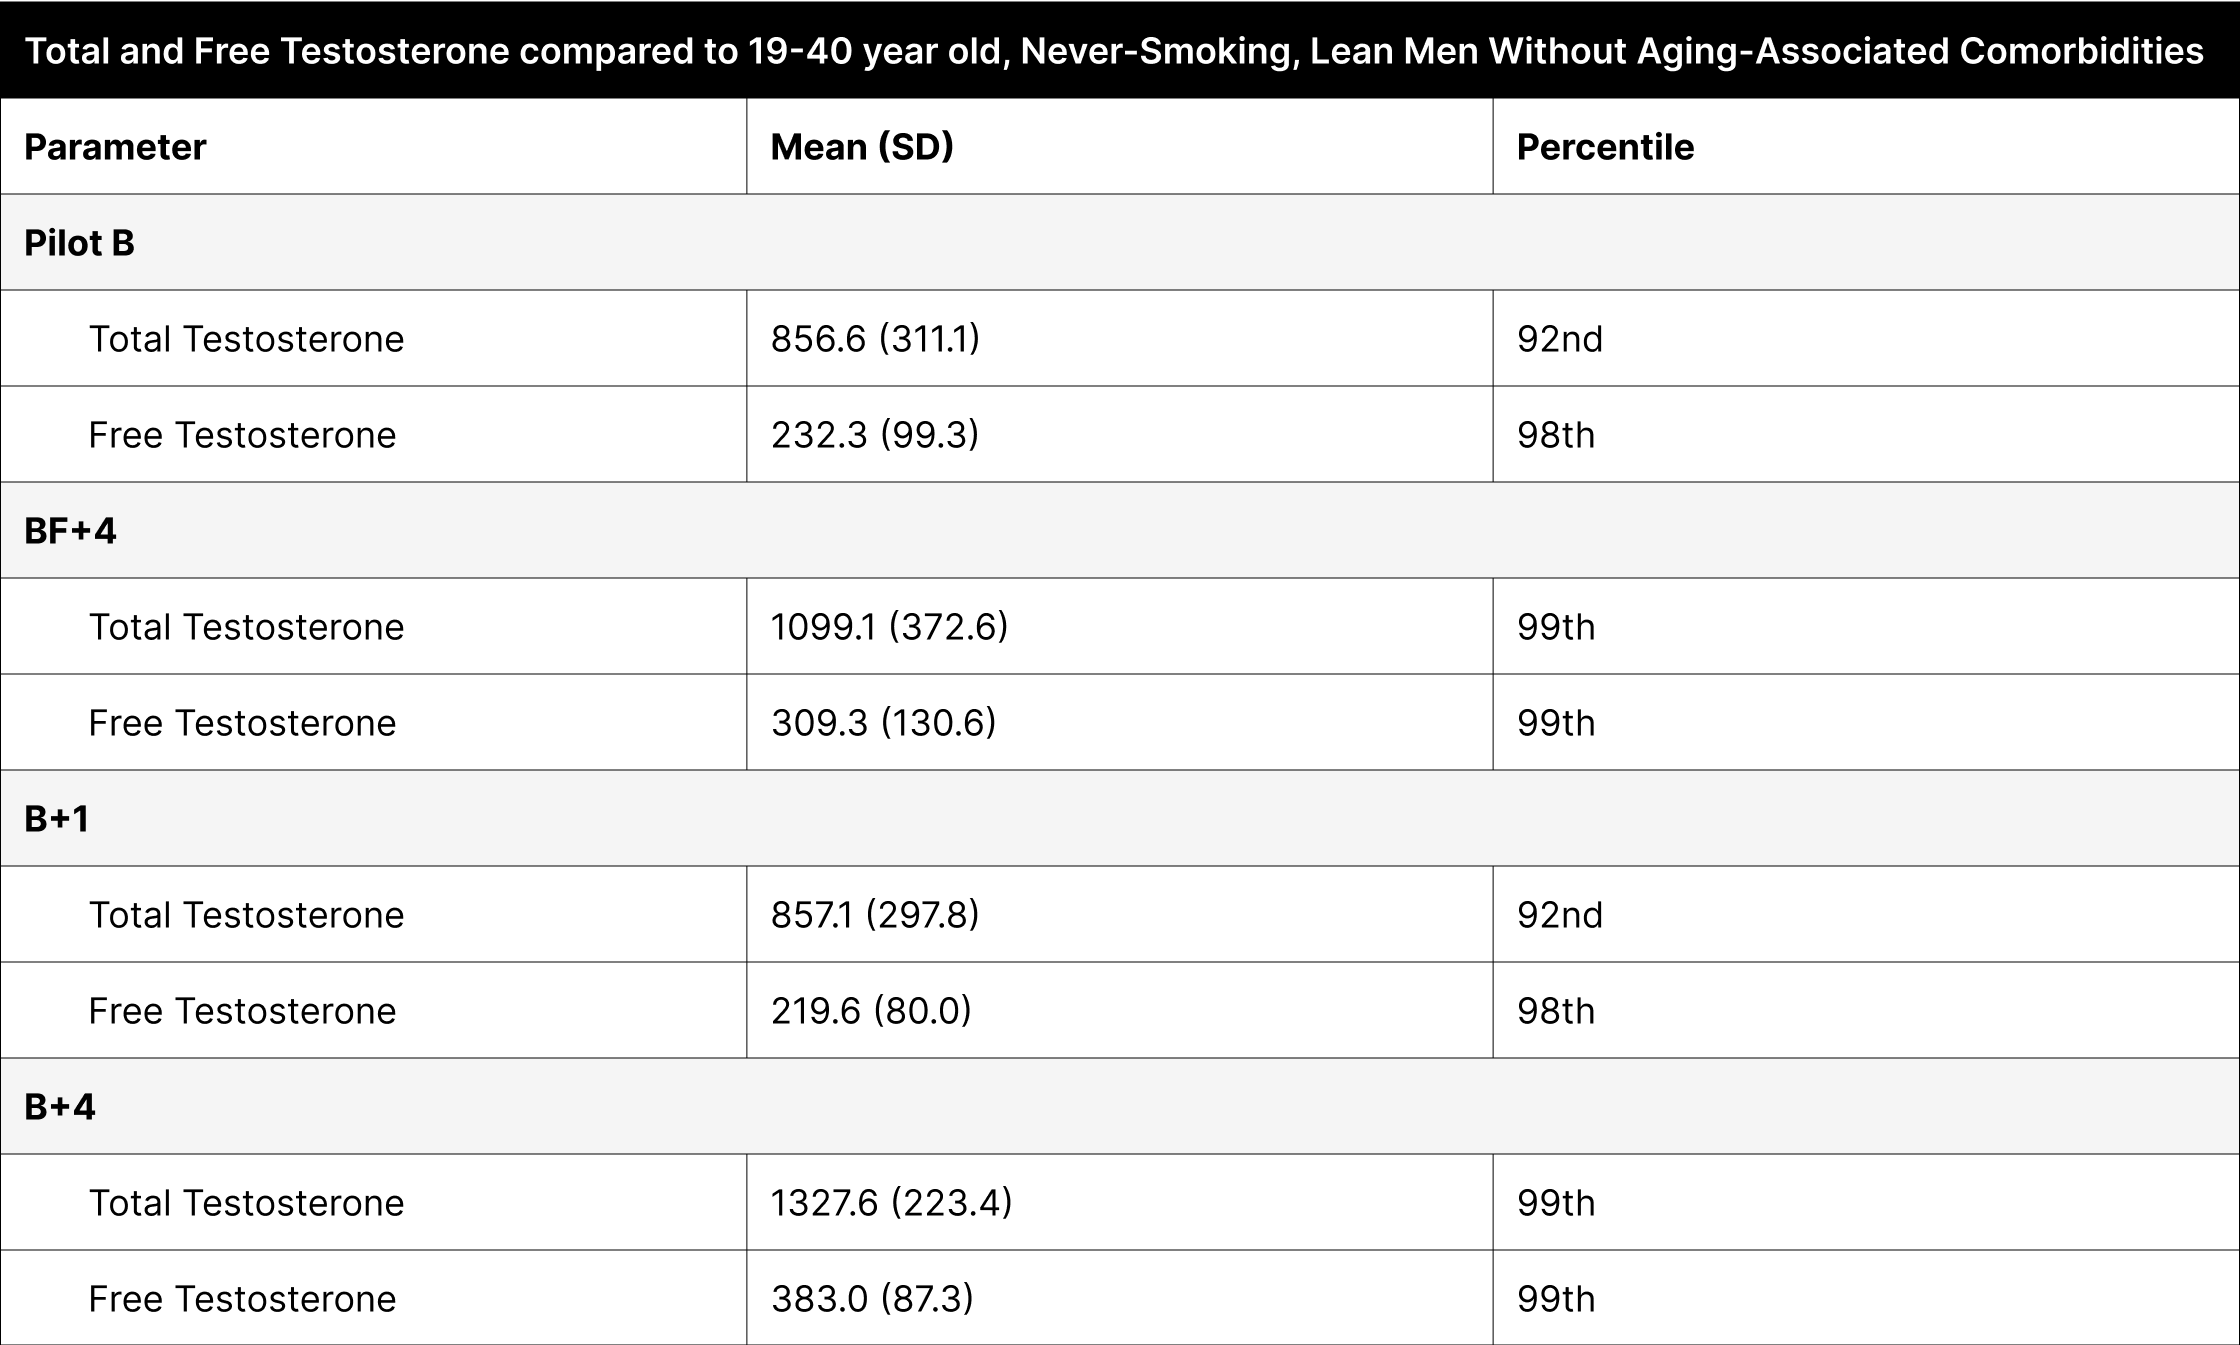 Total and Free Testosterone compared to 19-40 year old, Never-Smoking, Lean Men Without Aging-Associated Comorbidities